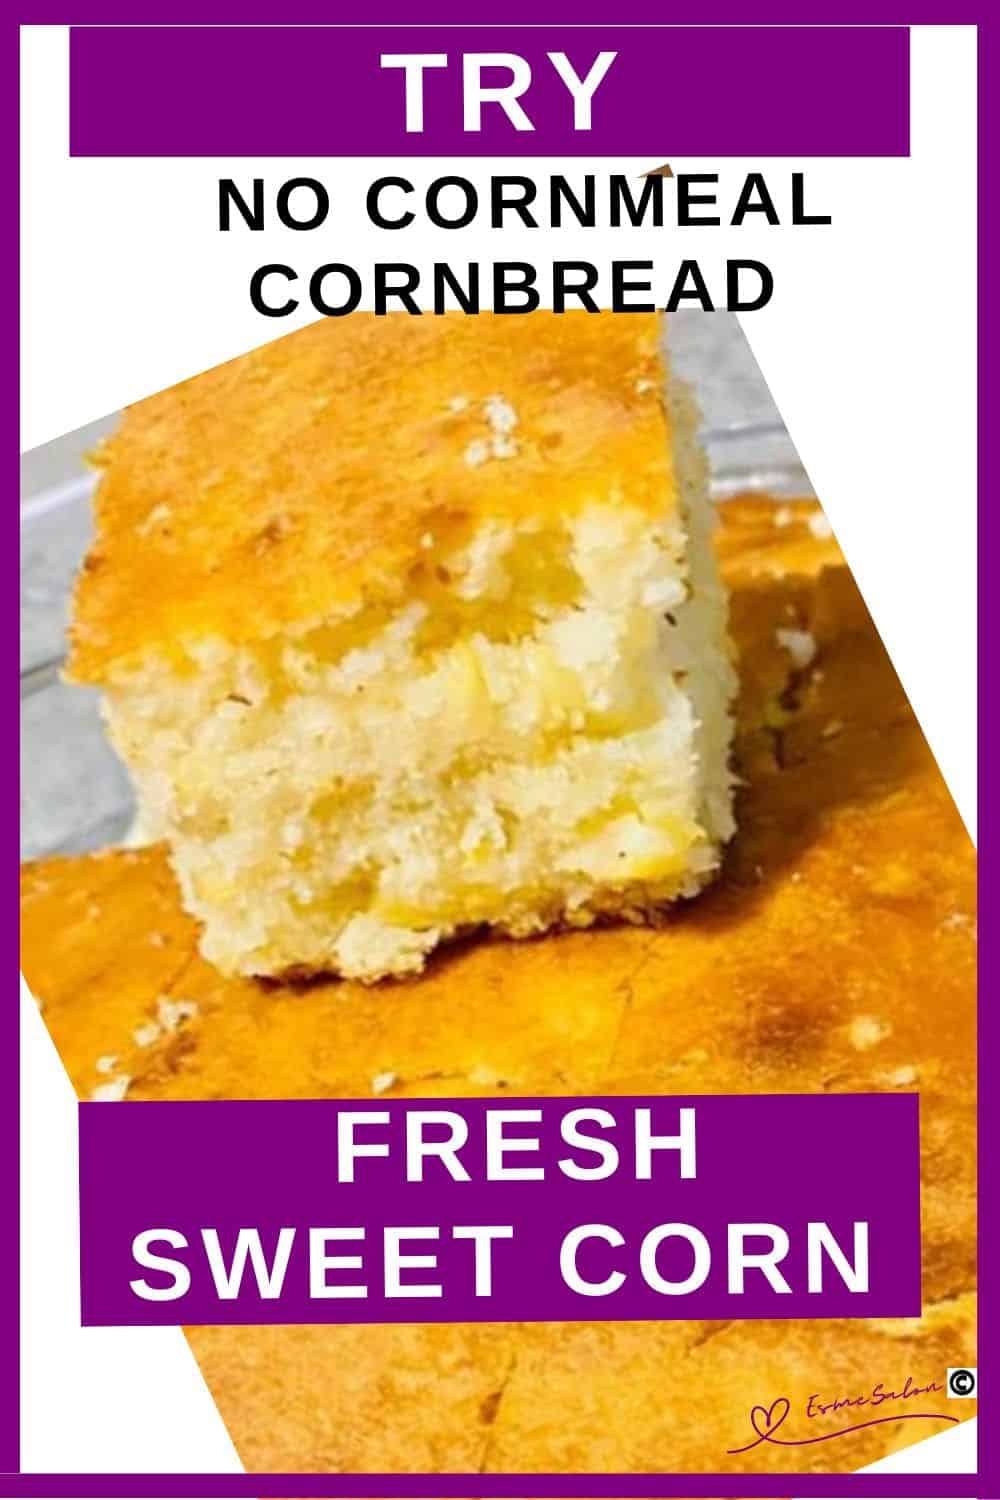 An image of a glass Pyrex dosh with cubes of Cornmeal Cornbread with Fresh Sweet Corn